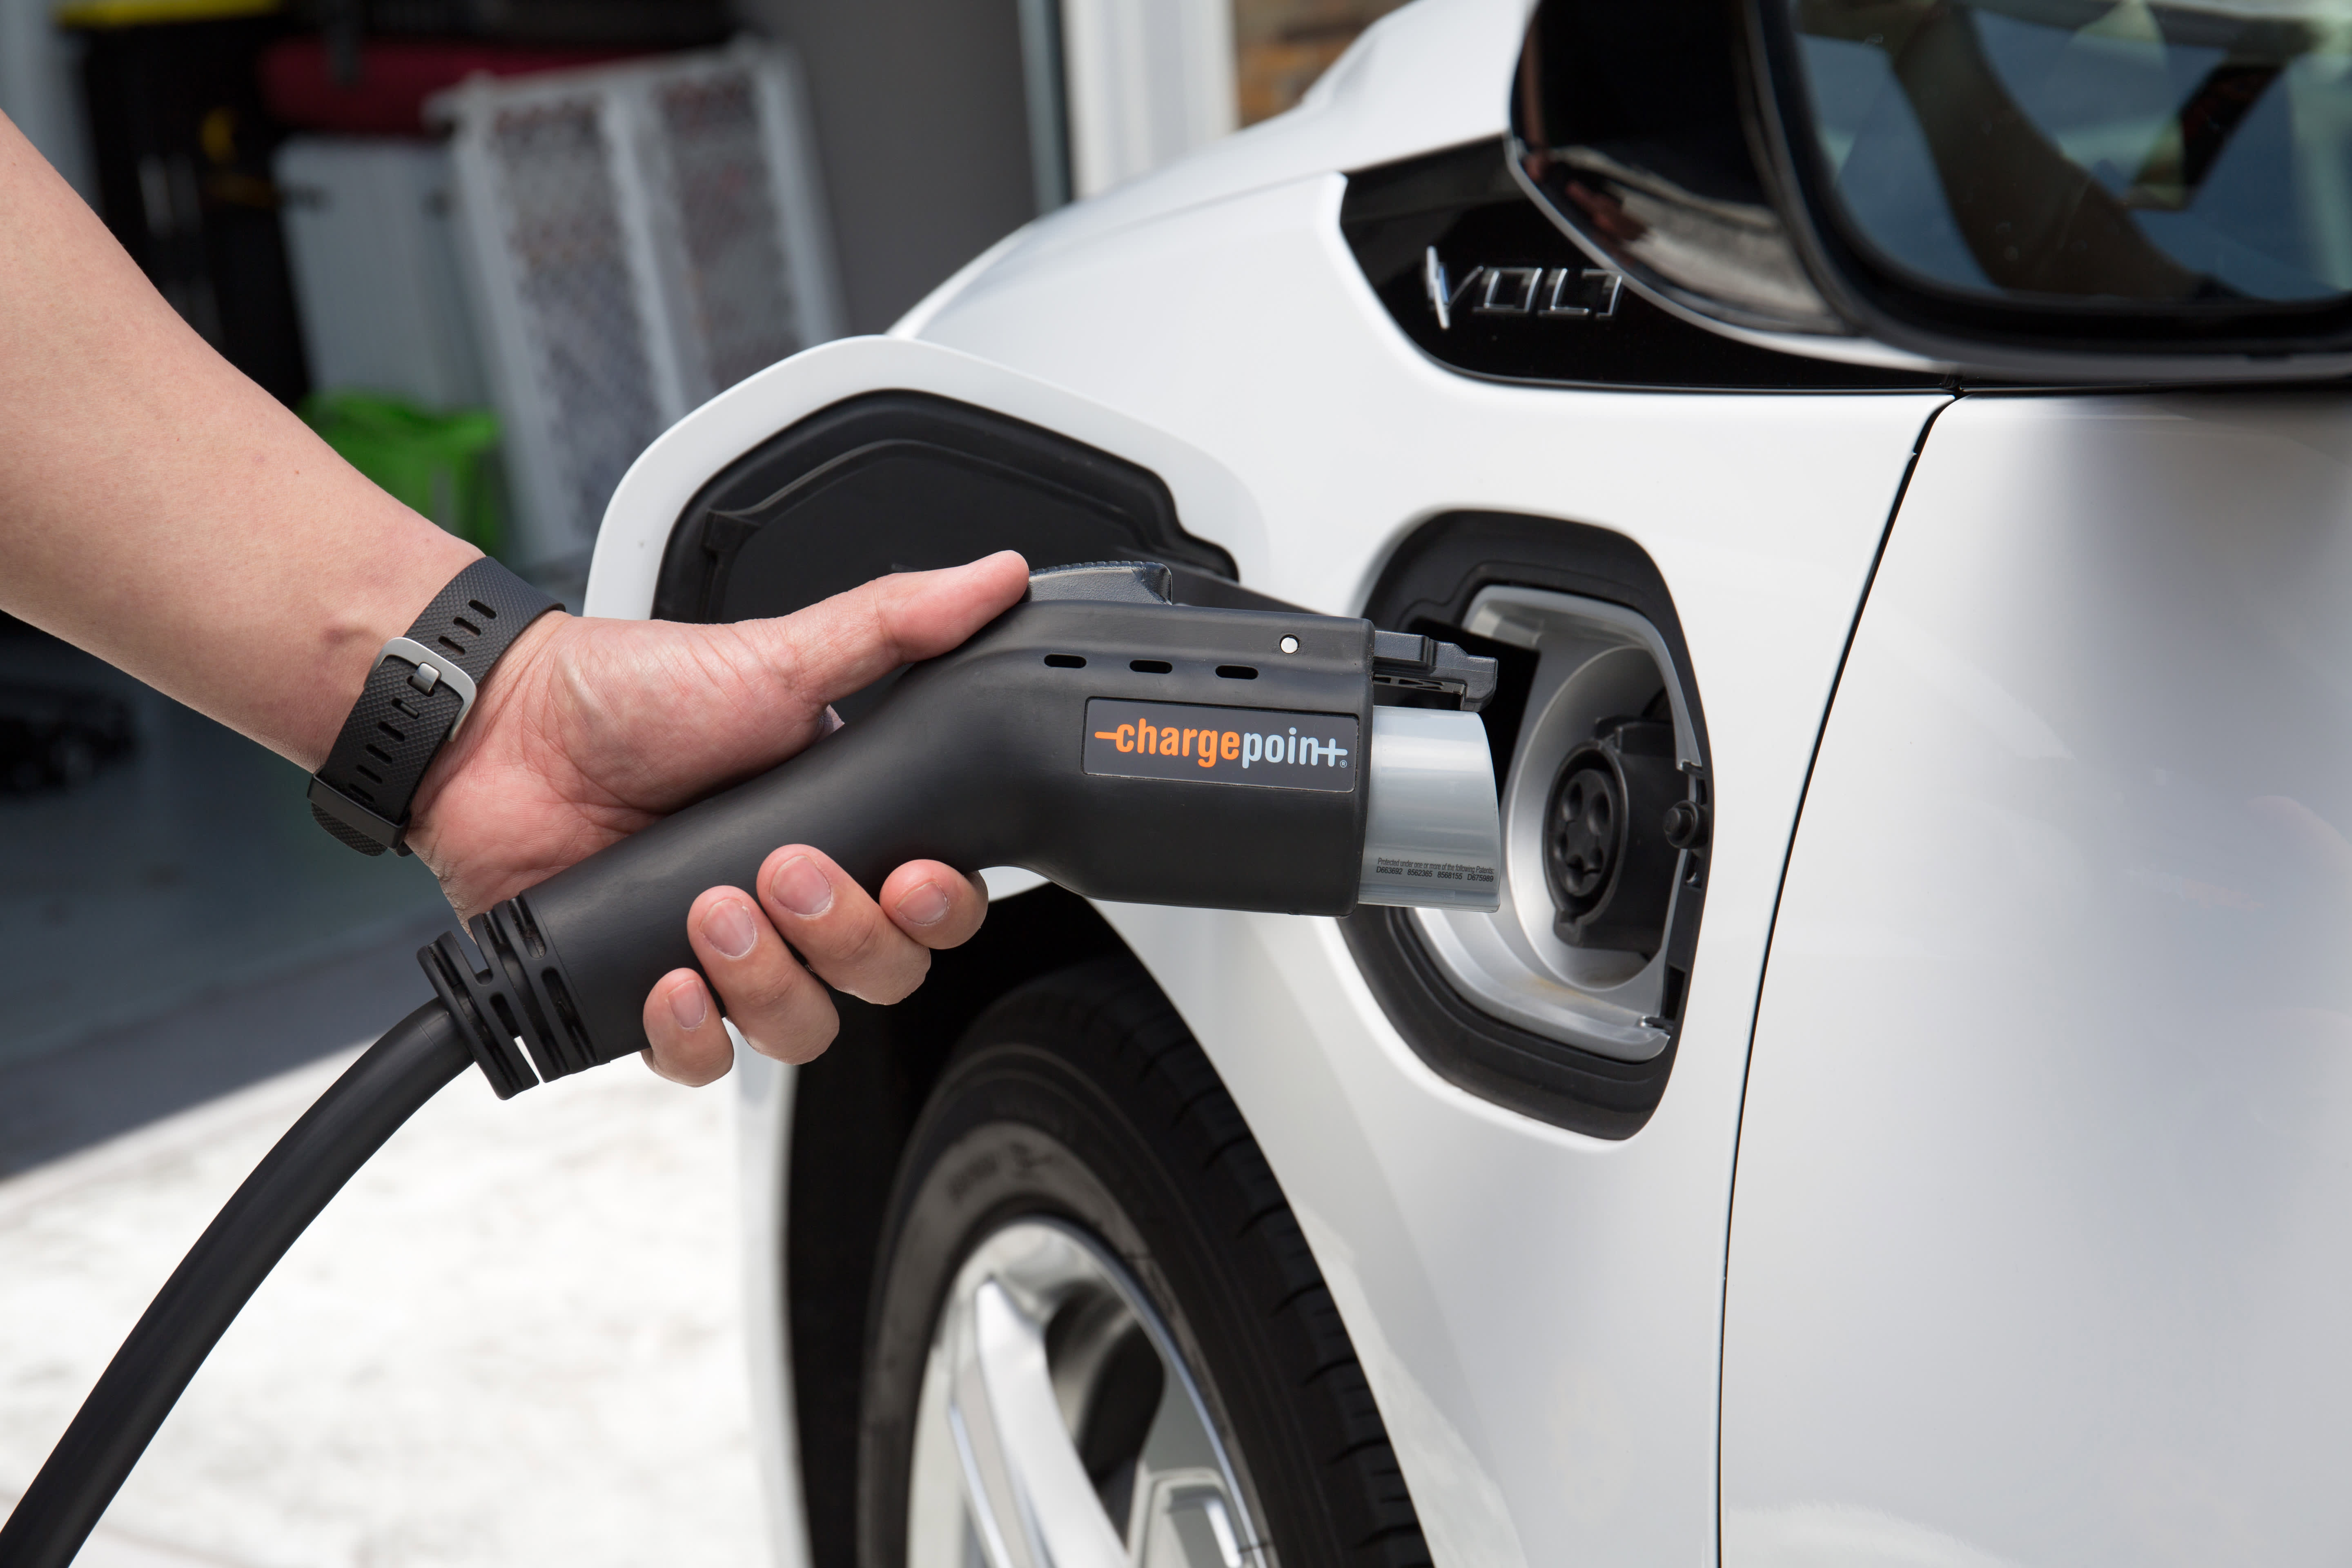 This EV charging station stock can surge 50% thanks to climate bill